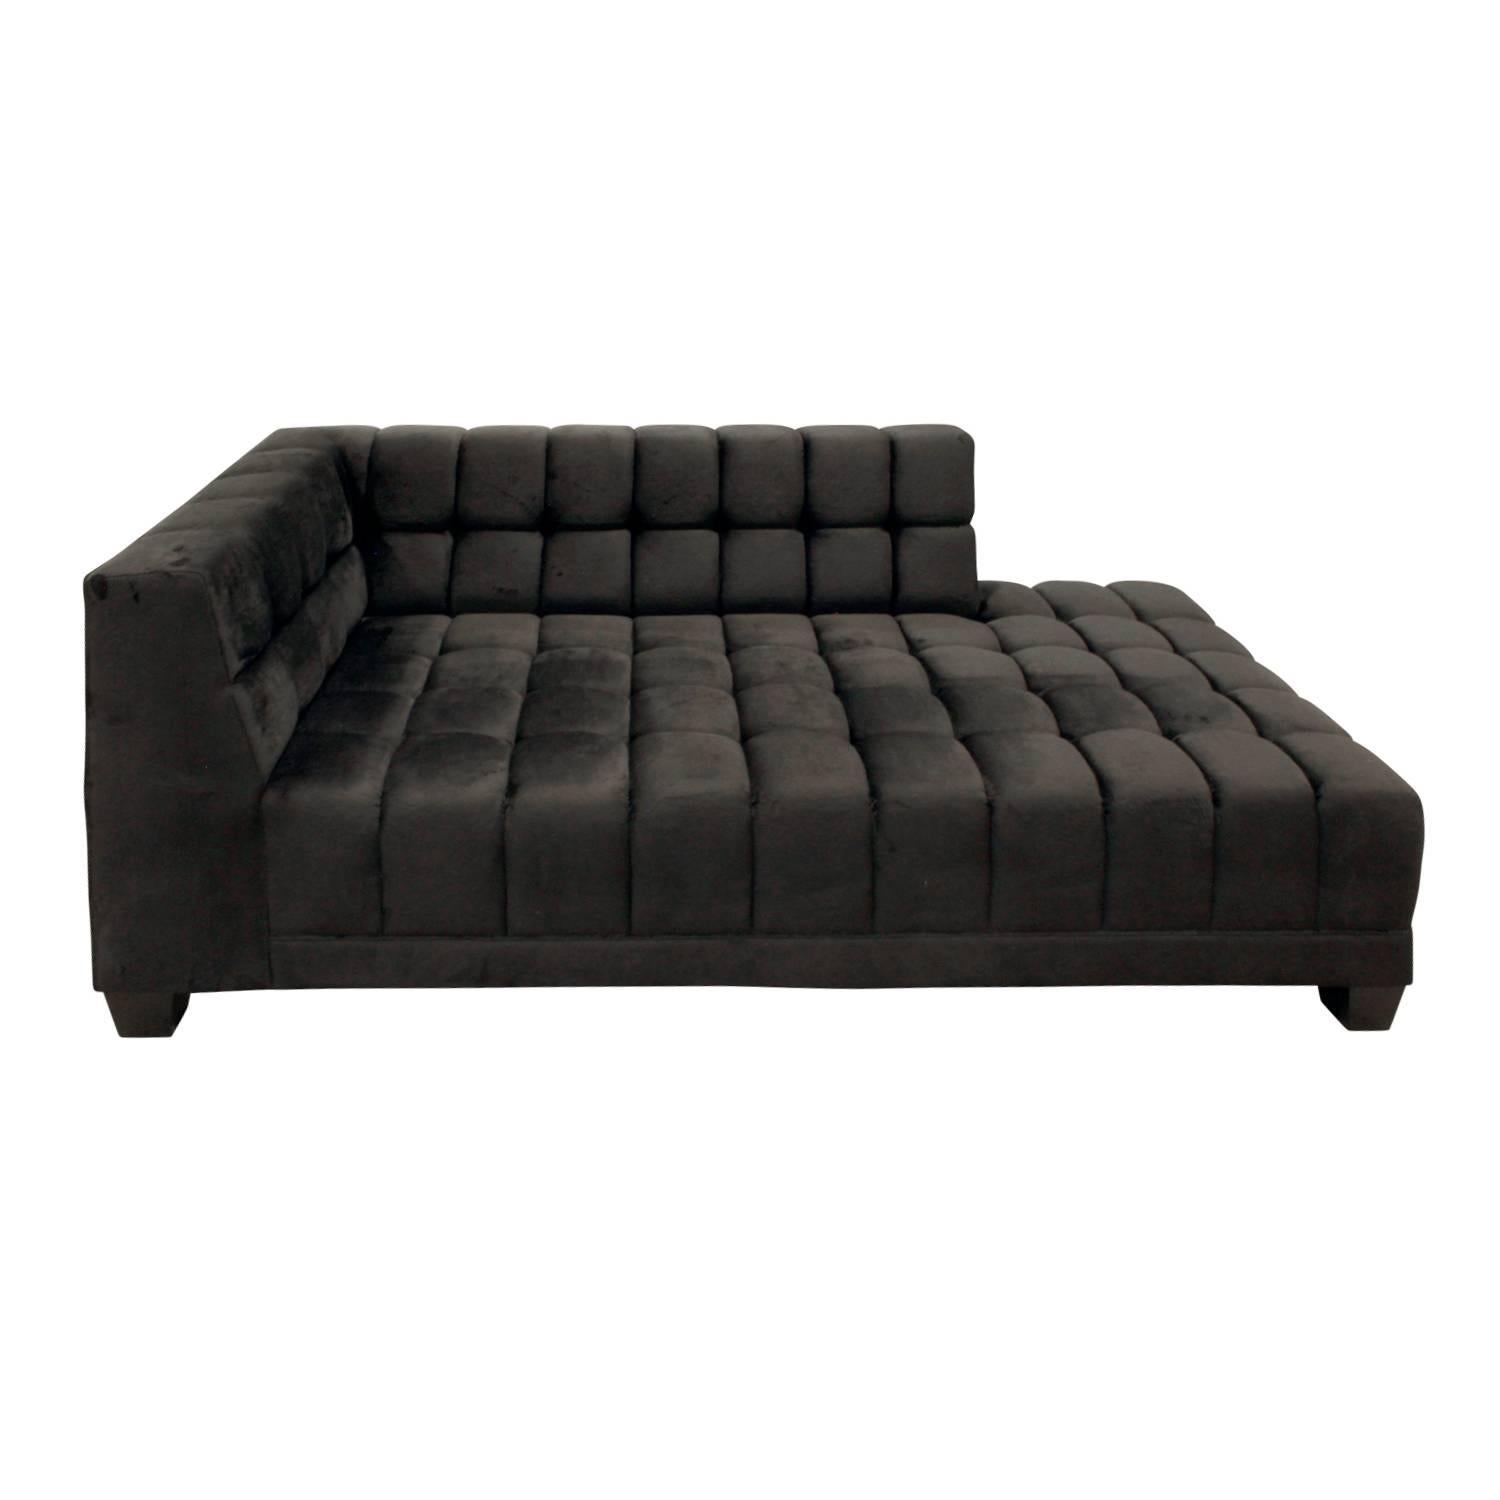 Lobel Originals "Box Tufted Chaise" Made to Order